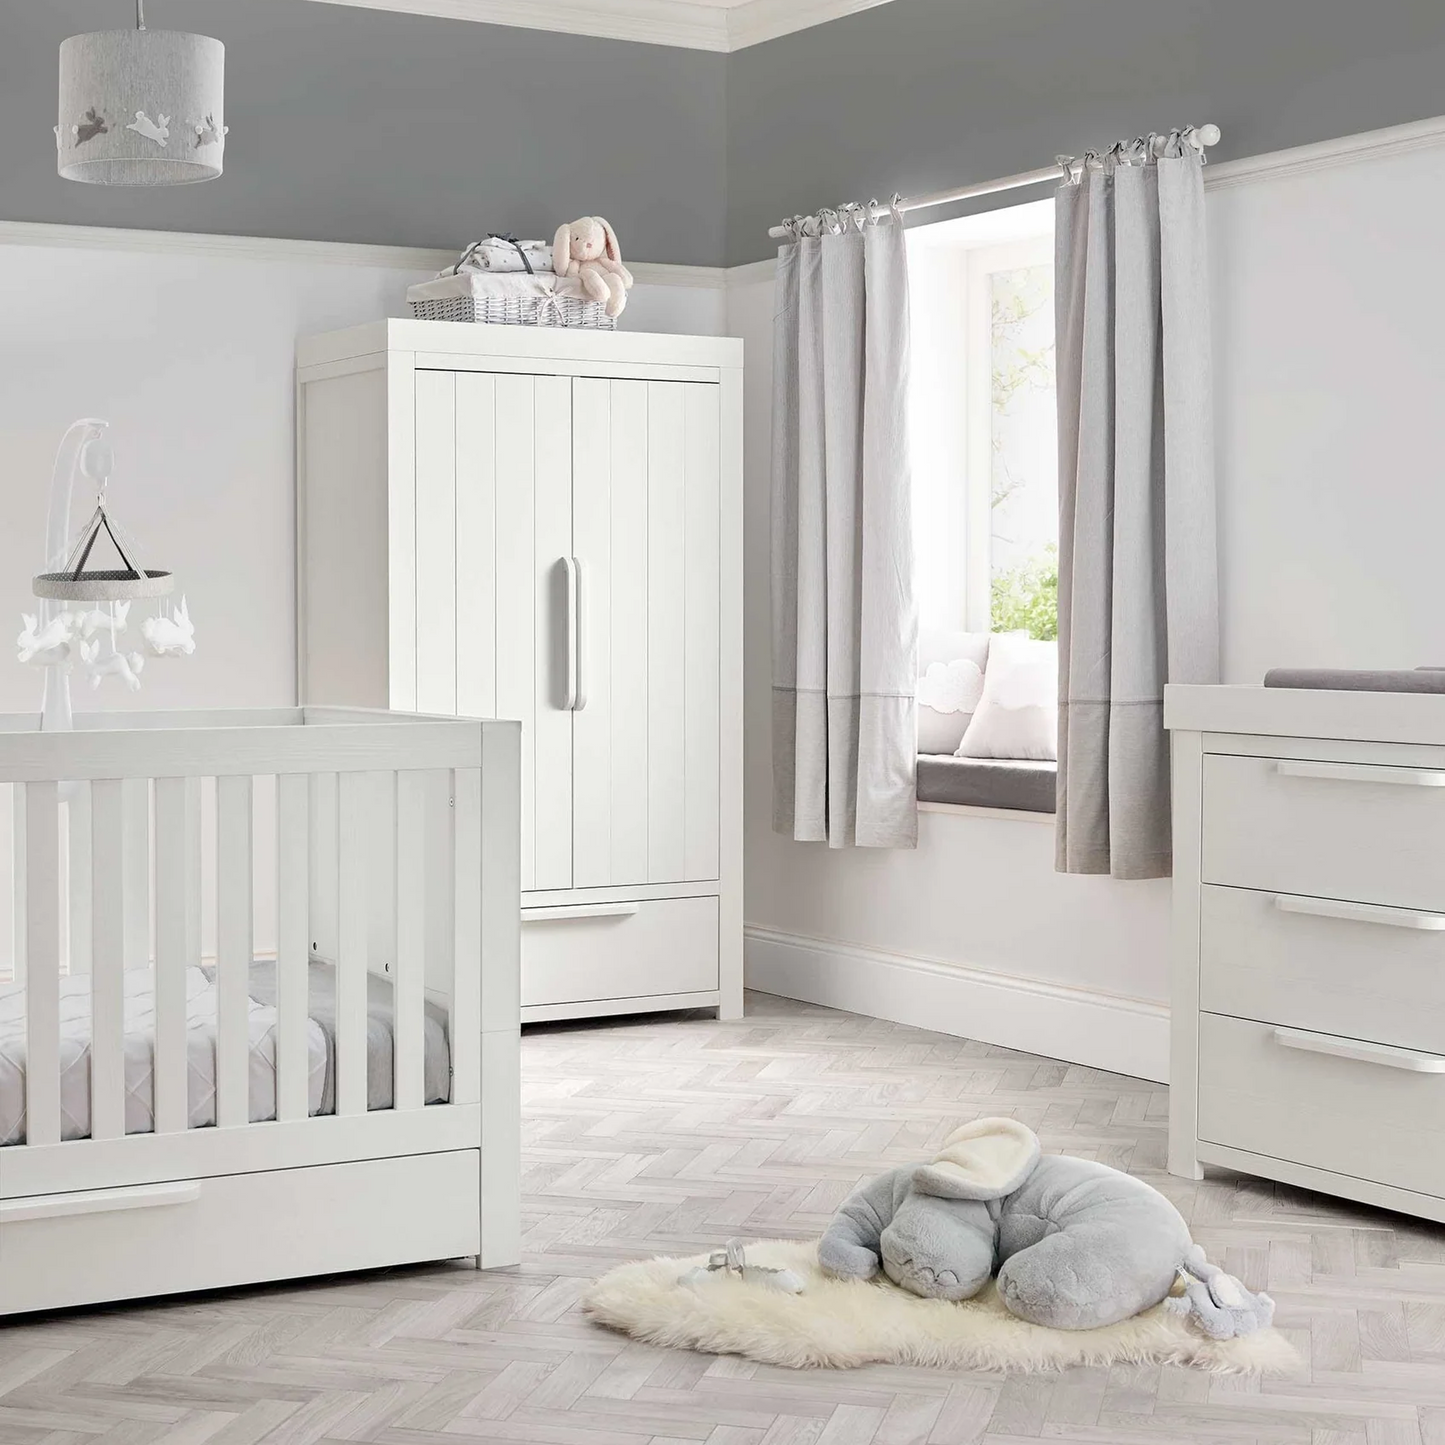 Mamas & Papas Franklin 3 Piece Range with Cot Bed, Dresser Changer and Wardrobe